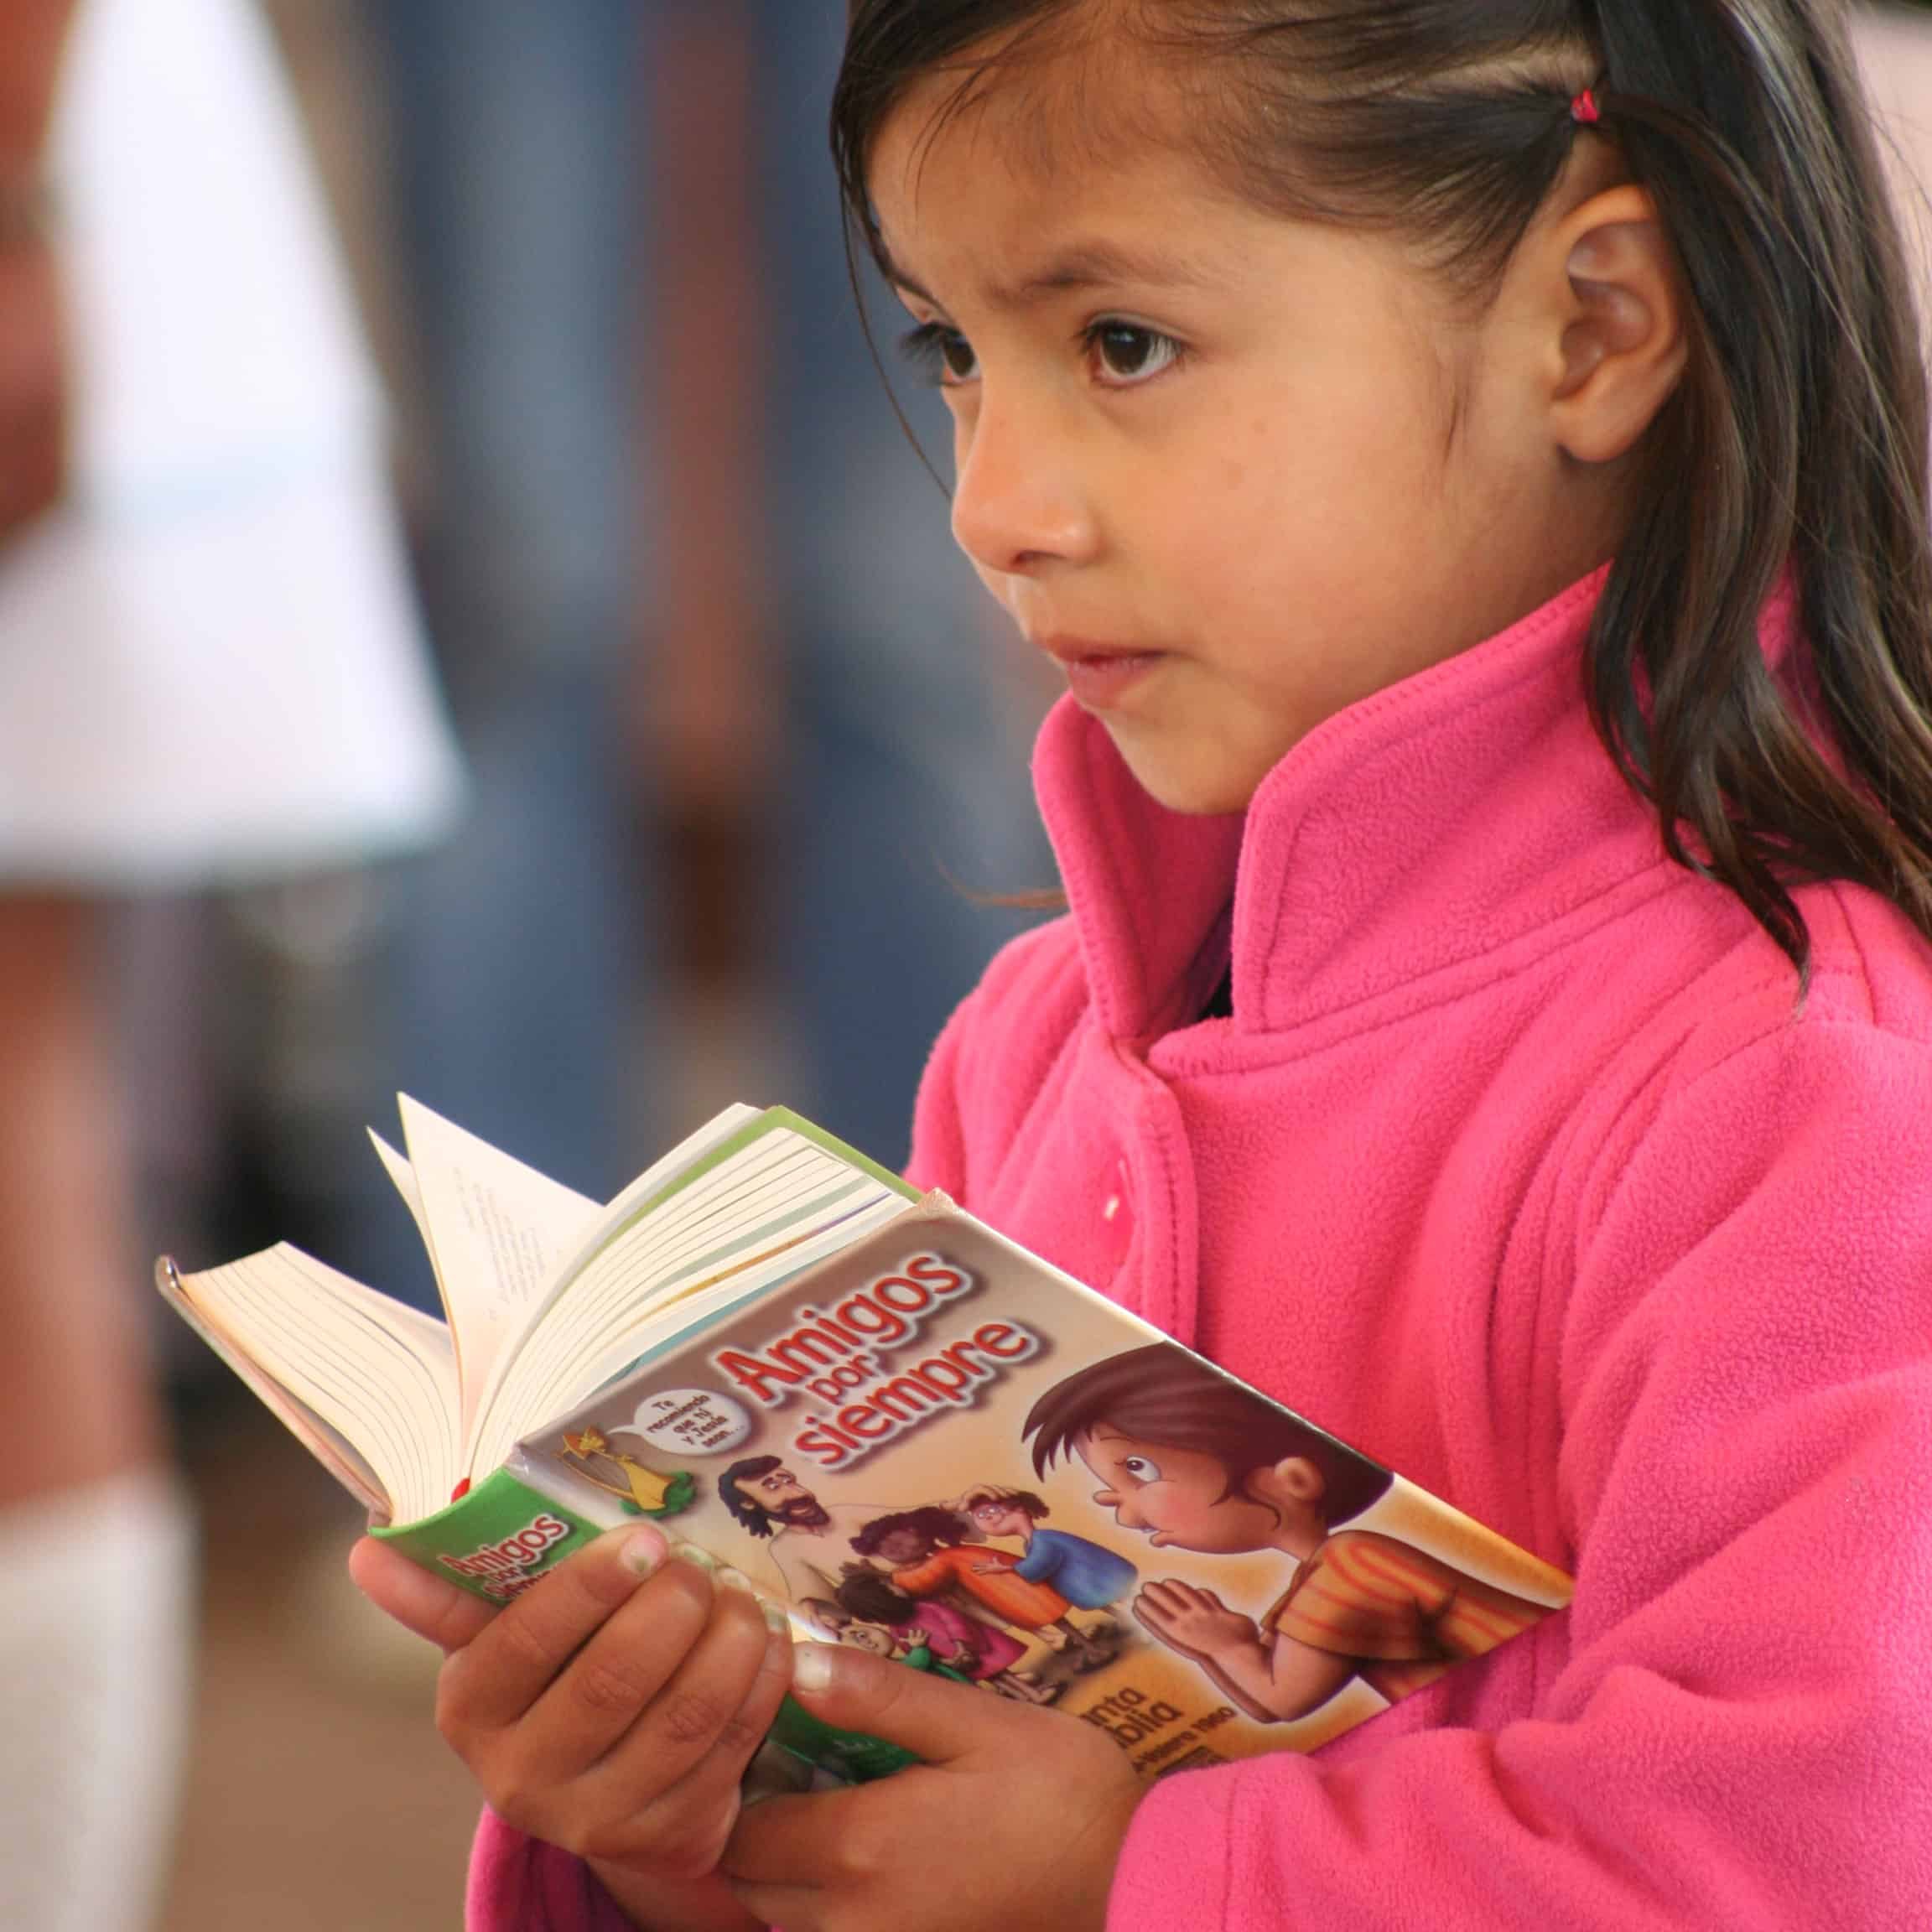 A little girl holds a Bible book in her hands